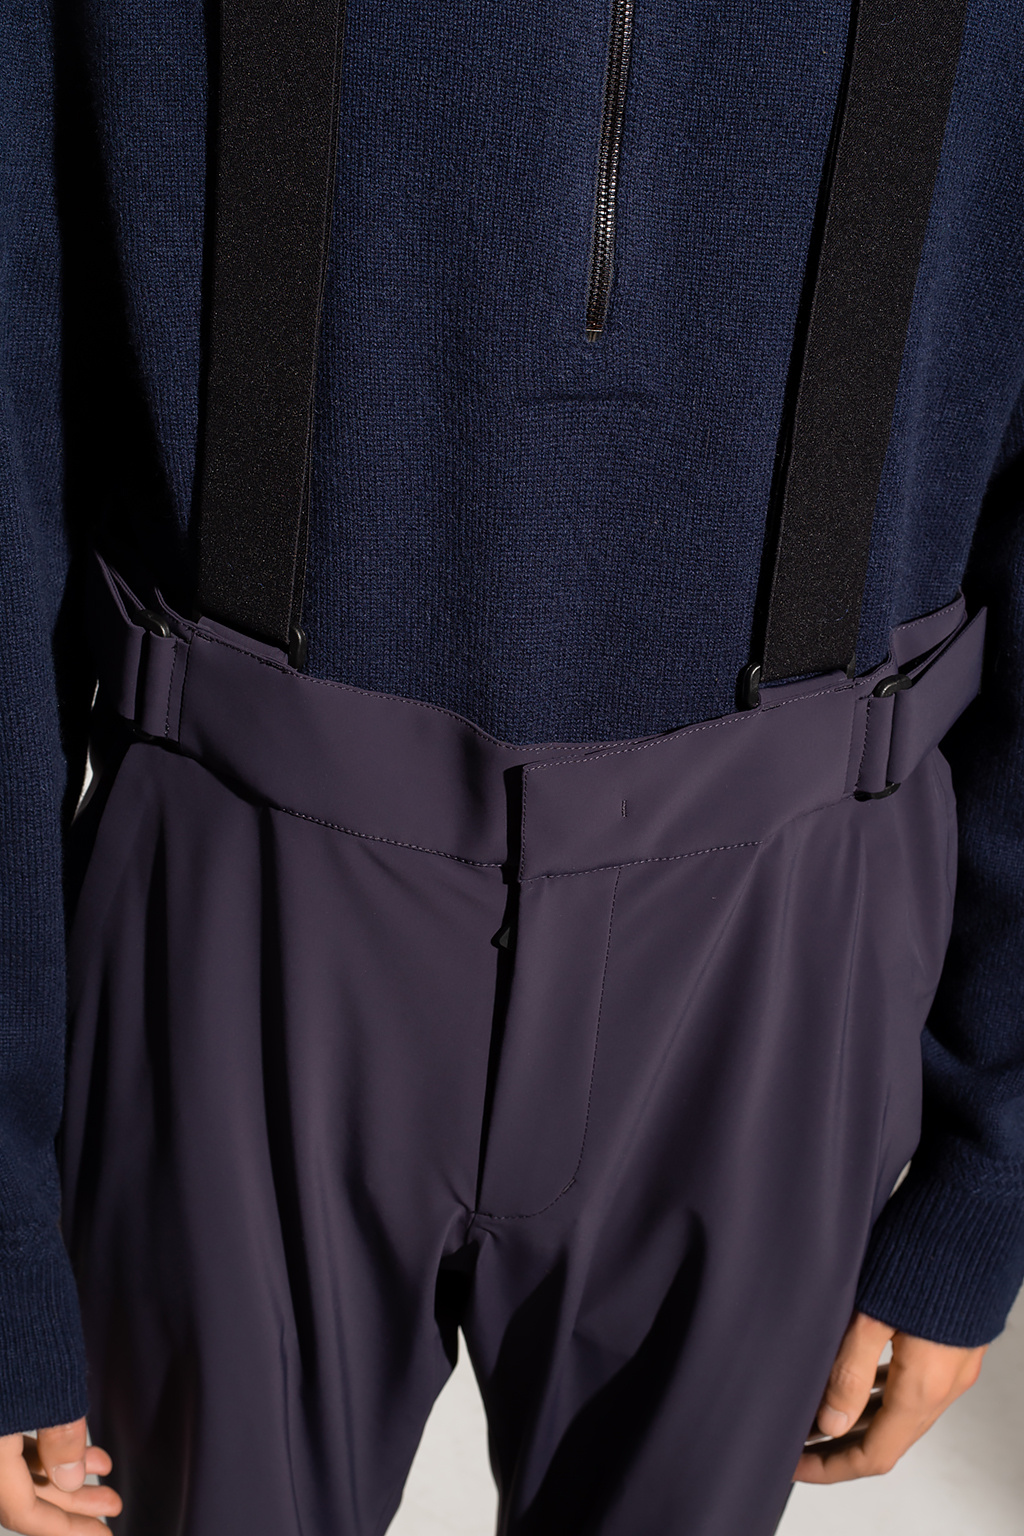 Moncler Grenoble Ski trousers with suspenders